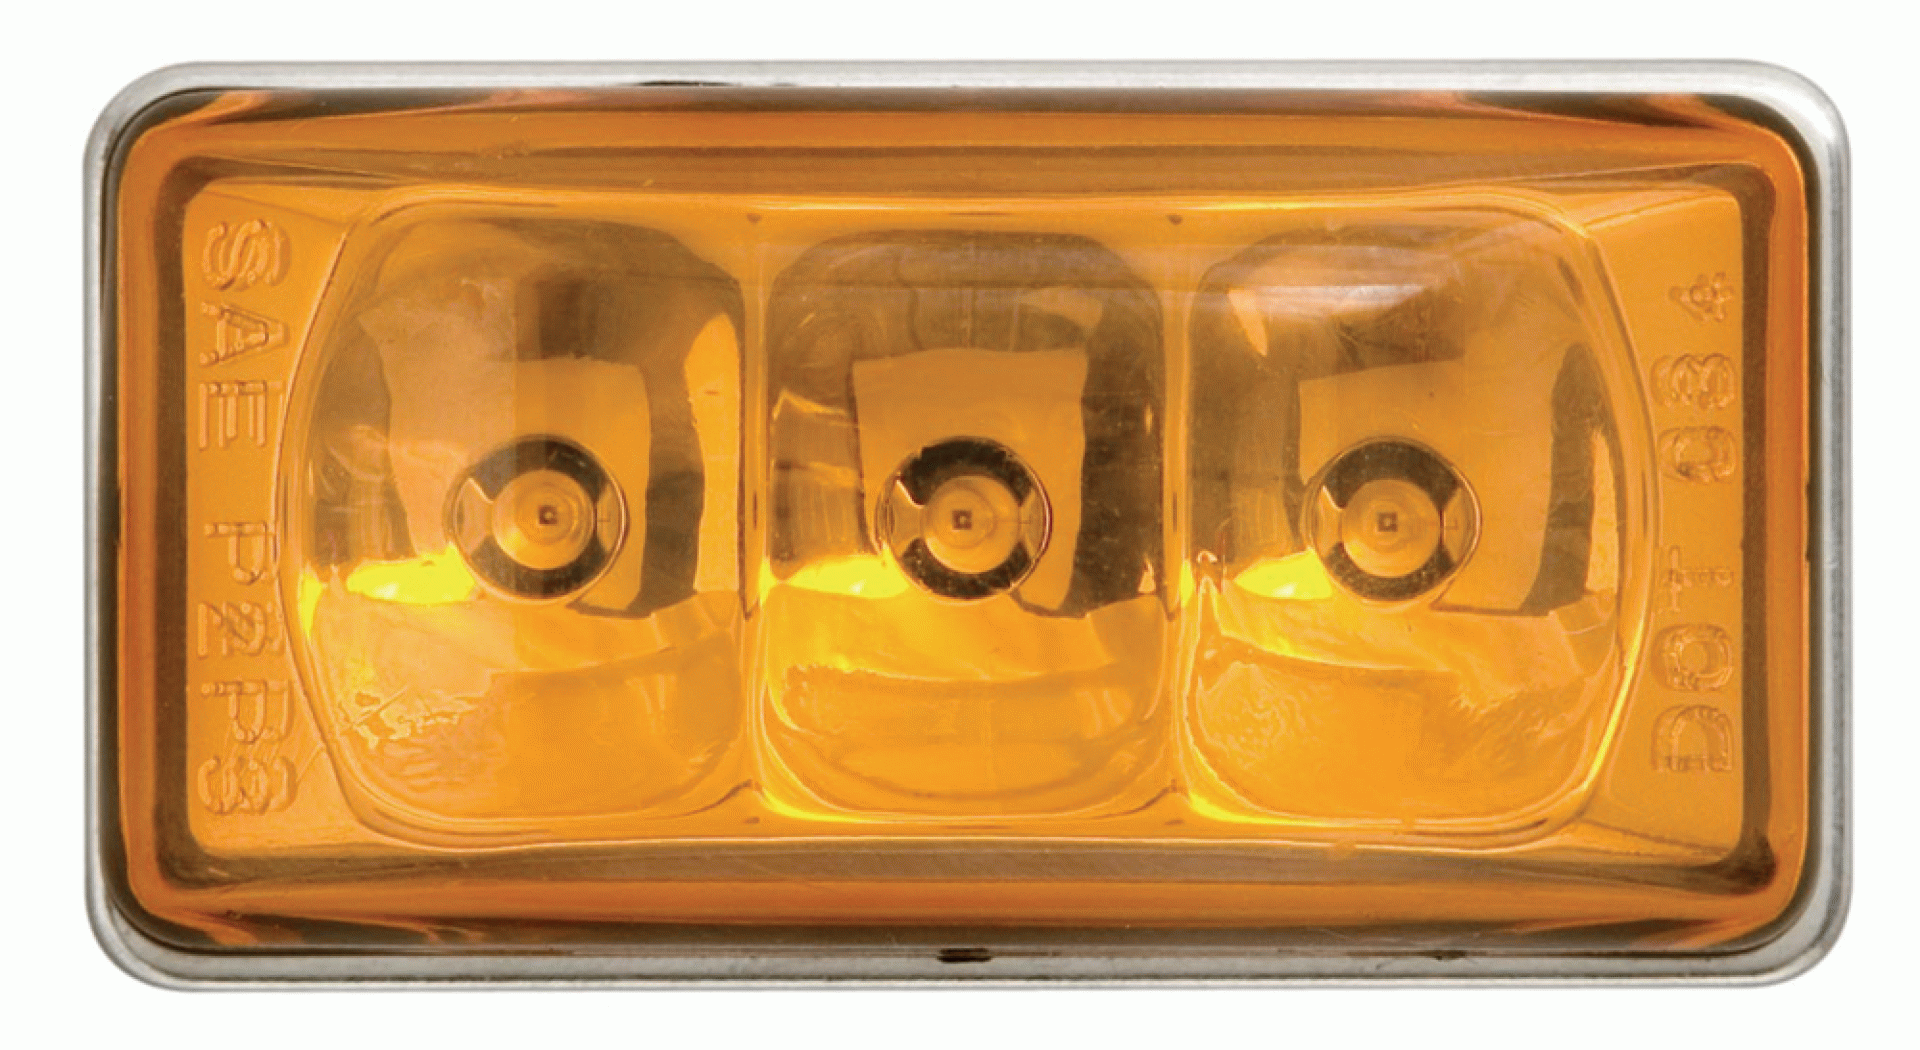 OPTRONICS INTERNATIONAL LLC | MCL95AS | SIDE MARKER/CLEARANCE LIGHT STUD MOUNT LED AMBER STAINLESS STEEL BASE